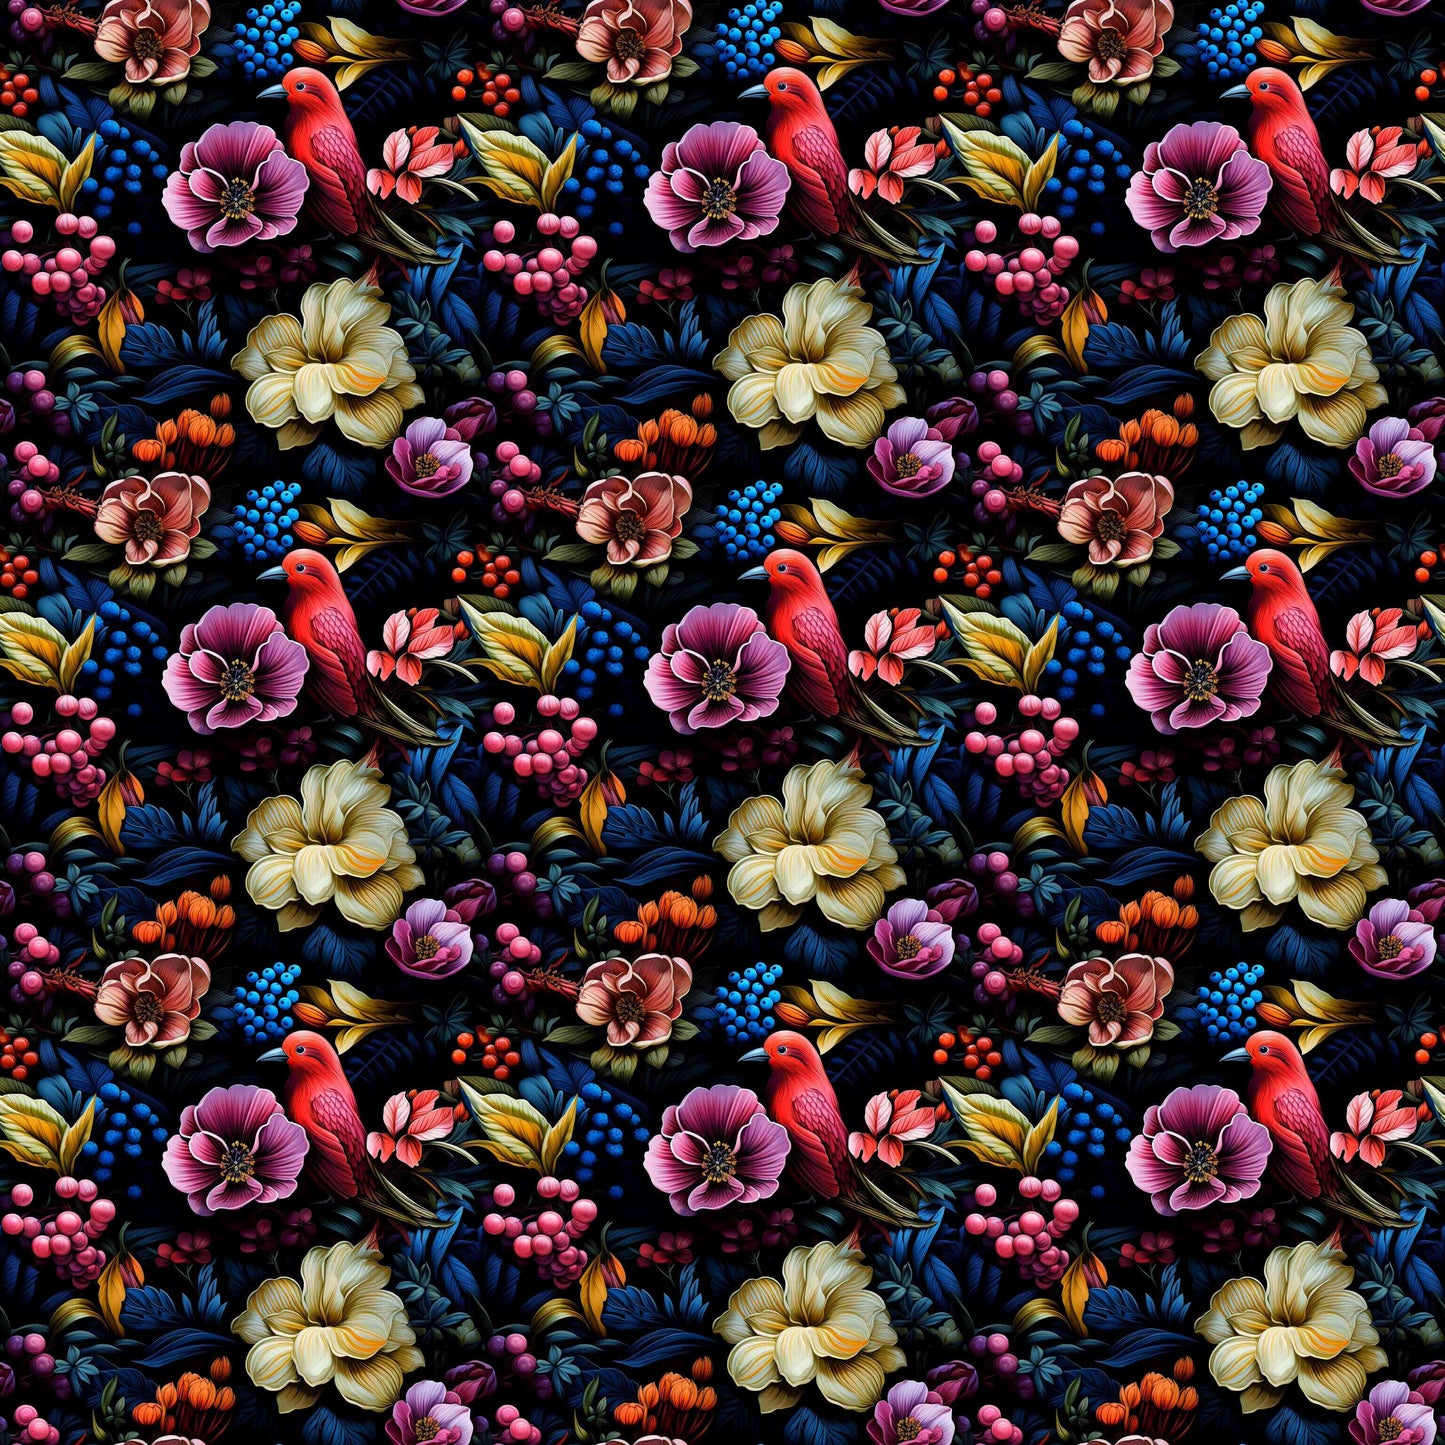 Intricate dark floral pattern wallpaper, where deep hues meet lush blooms for a striking and elegant design contrast